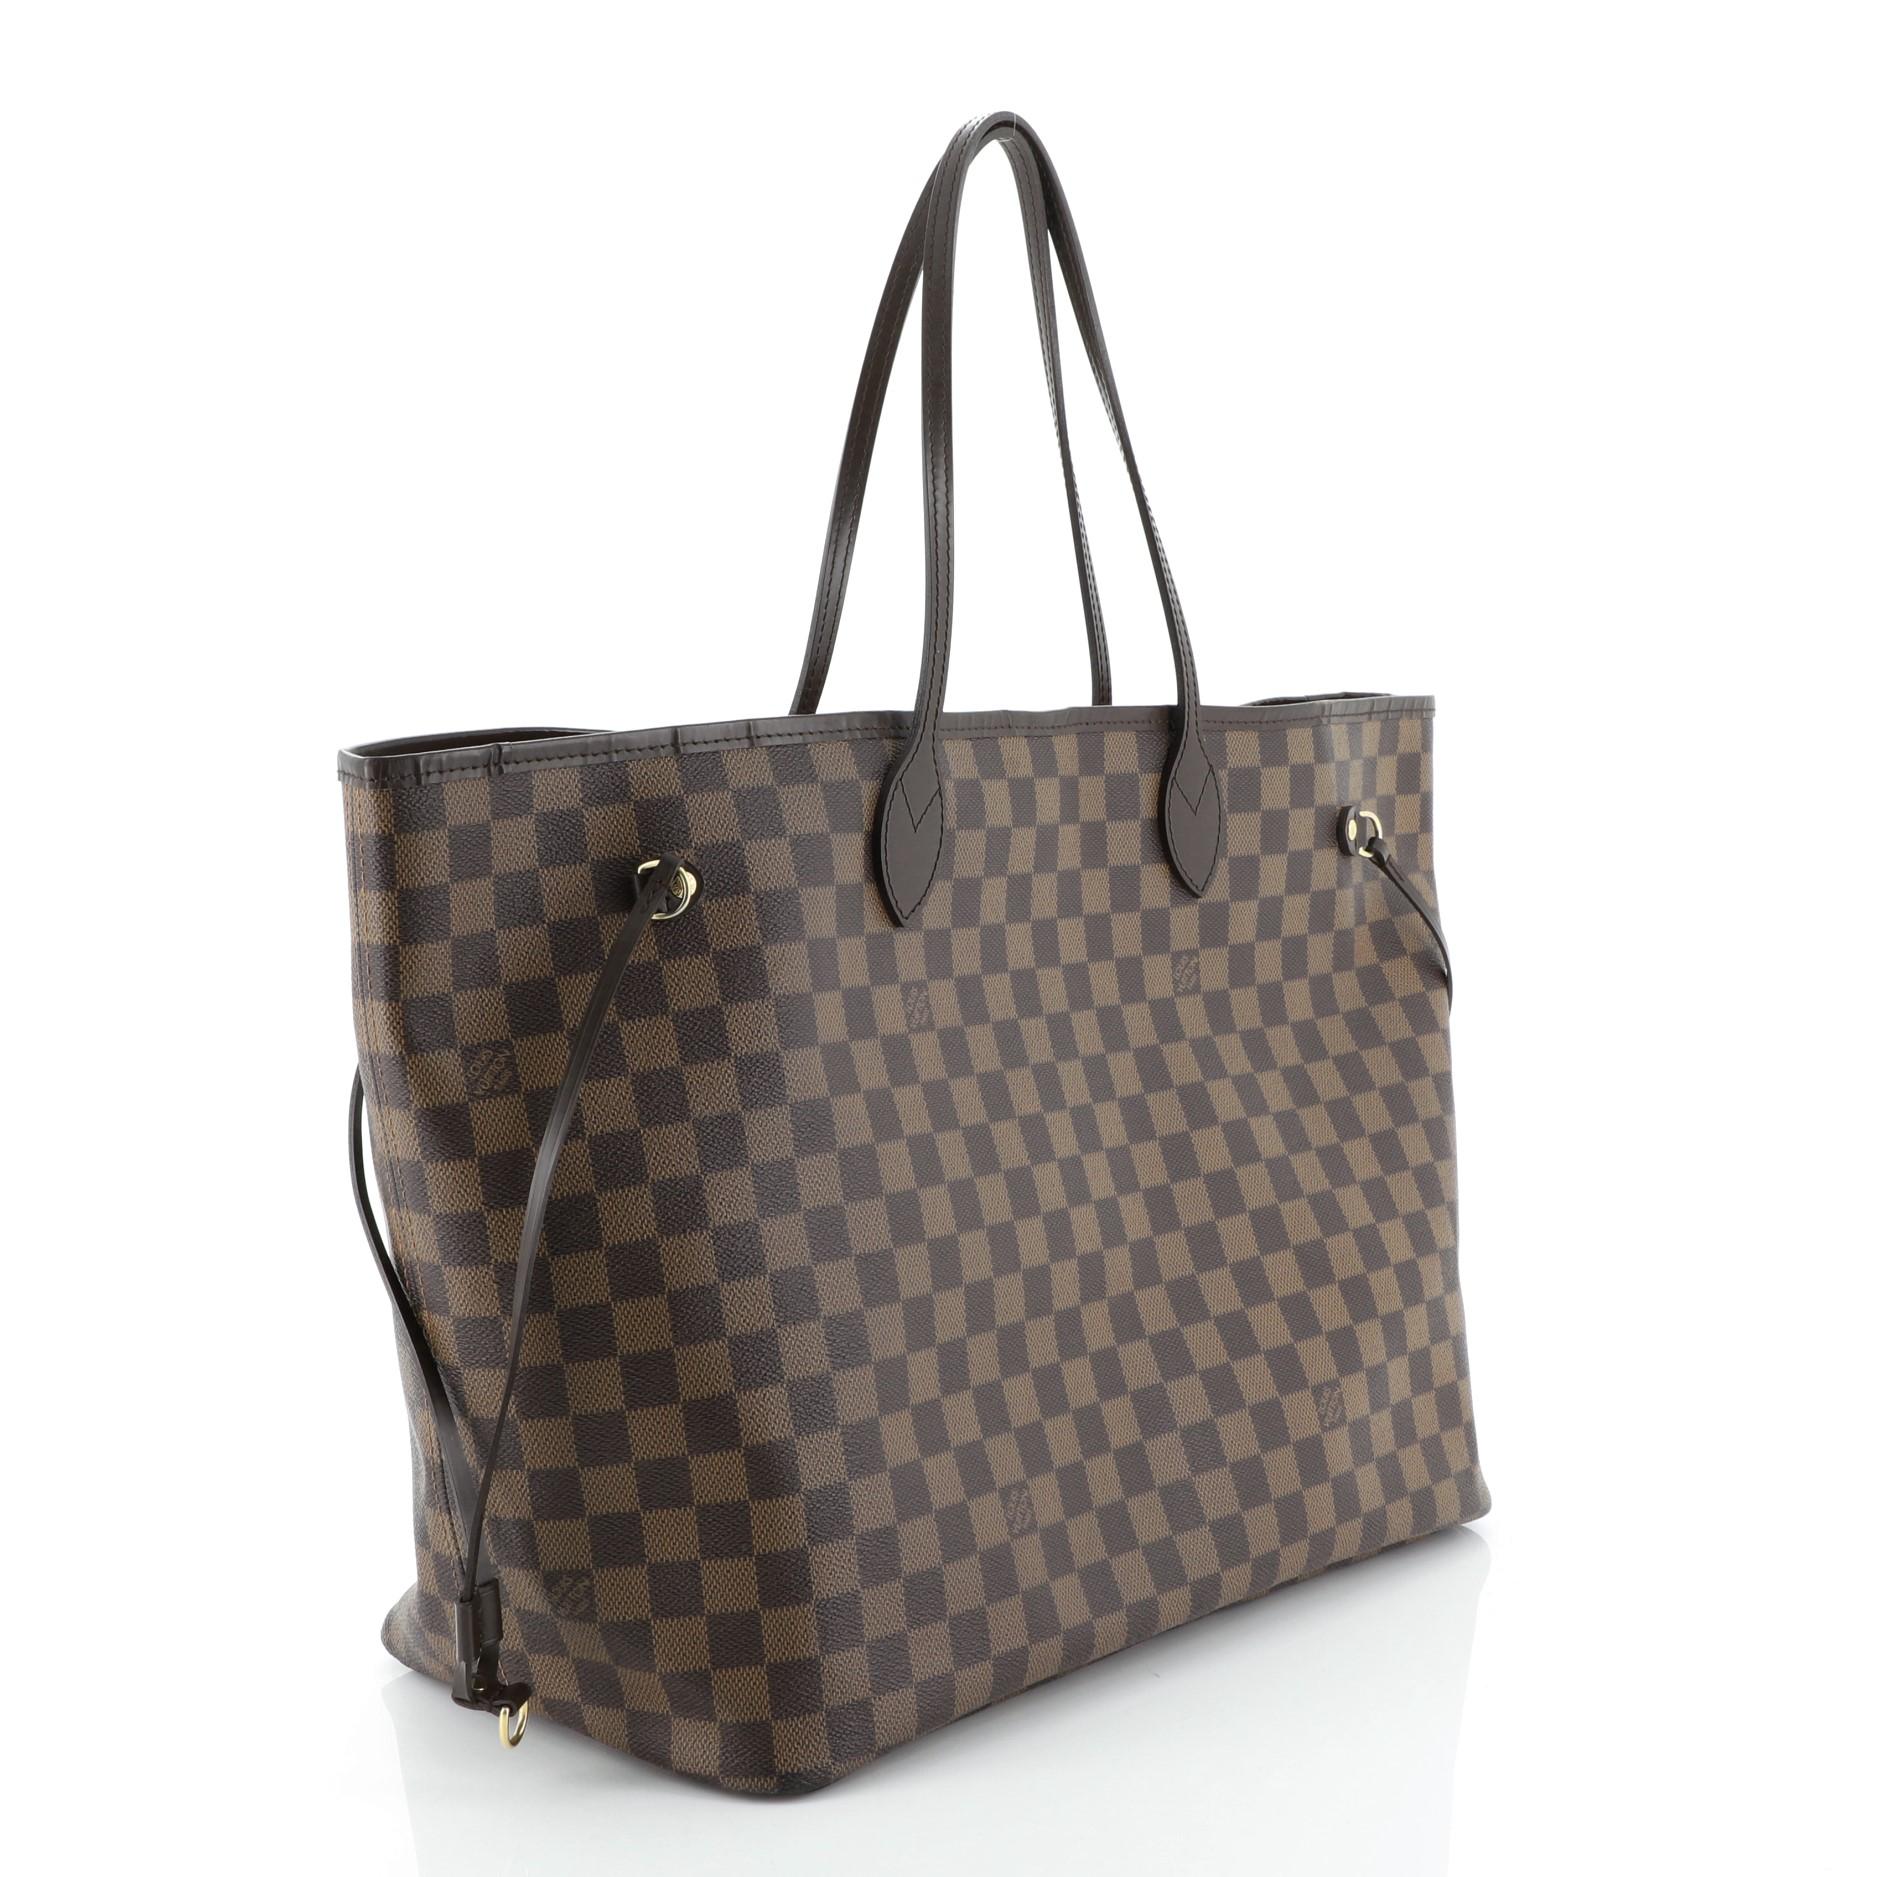 This Louis Vuitton Neverfull Tote Damier GM, crafted in damier ebene coated canvas, features dual slim handles, side laces, and gold-tone hardware. Its wide open top showcases a red fabric interior with side zip pocket. Authenticity code reads: